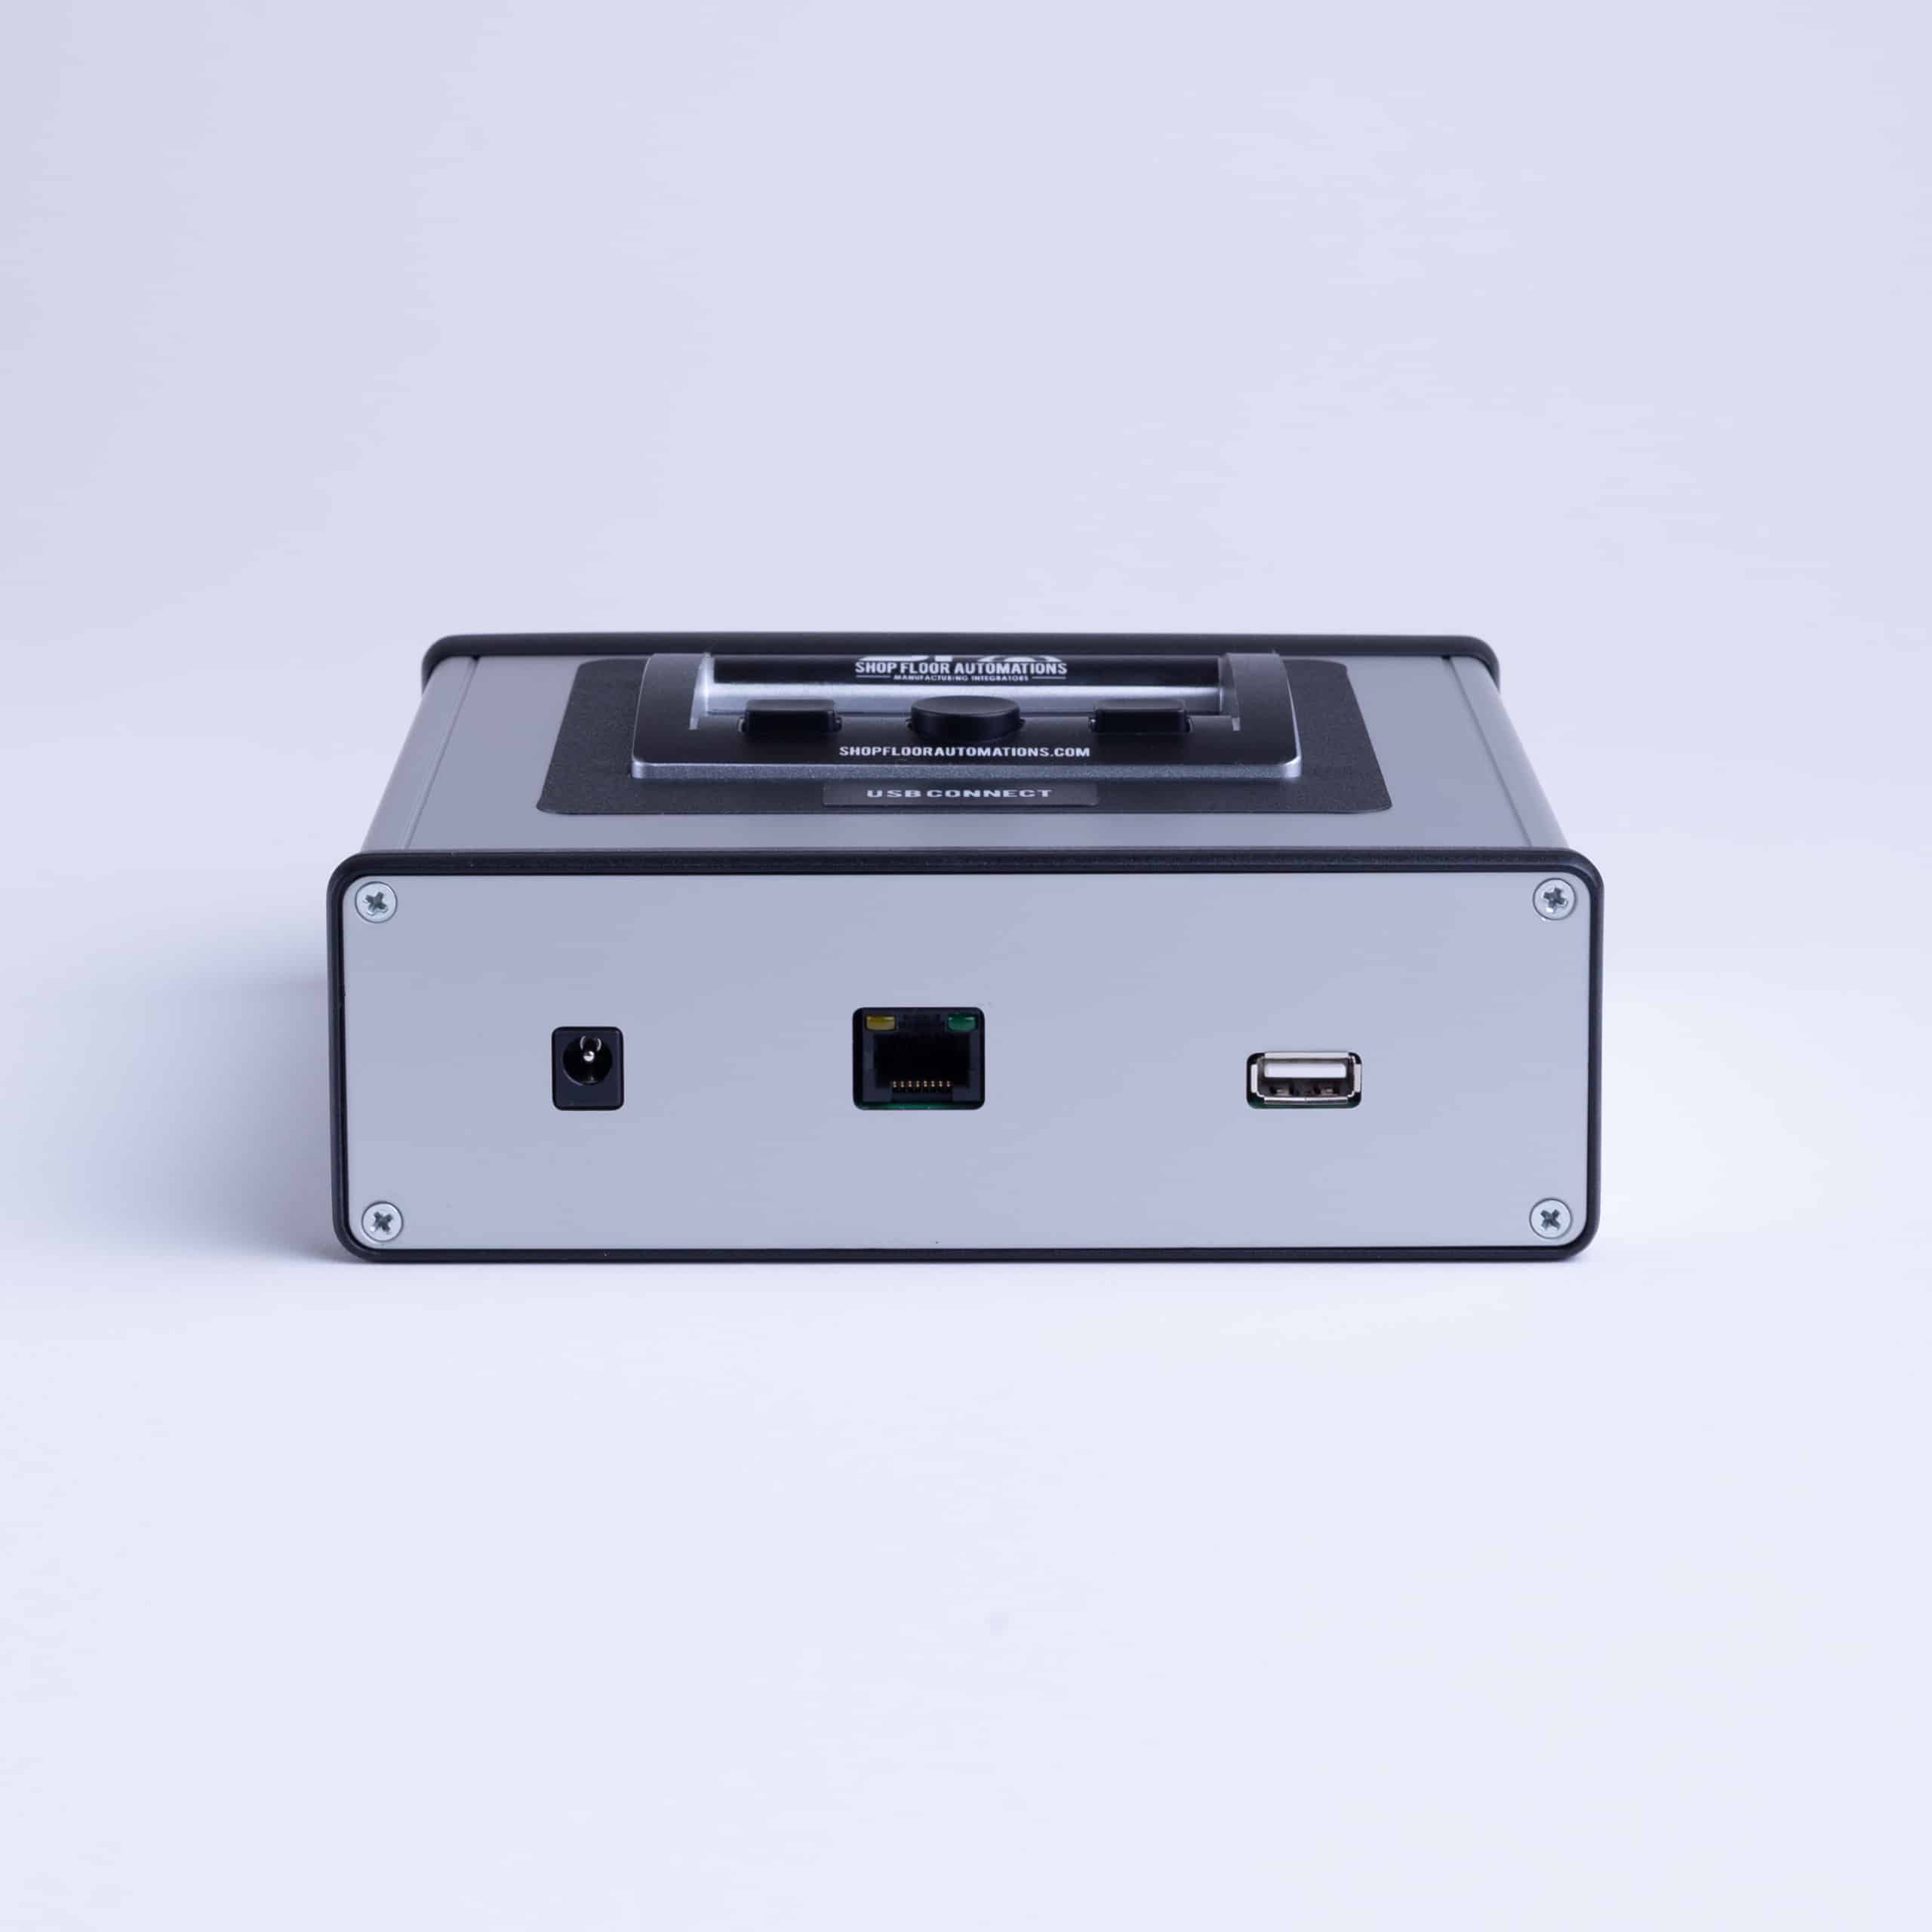 A bottom view of the USB Connect Portable, an external box-like DNC device, which shows its 3 ports: power supply port, serial port, and USB port.